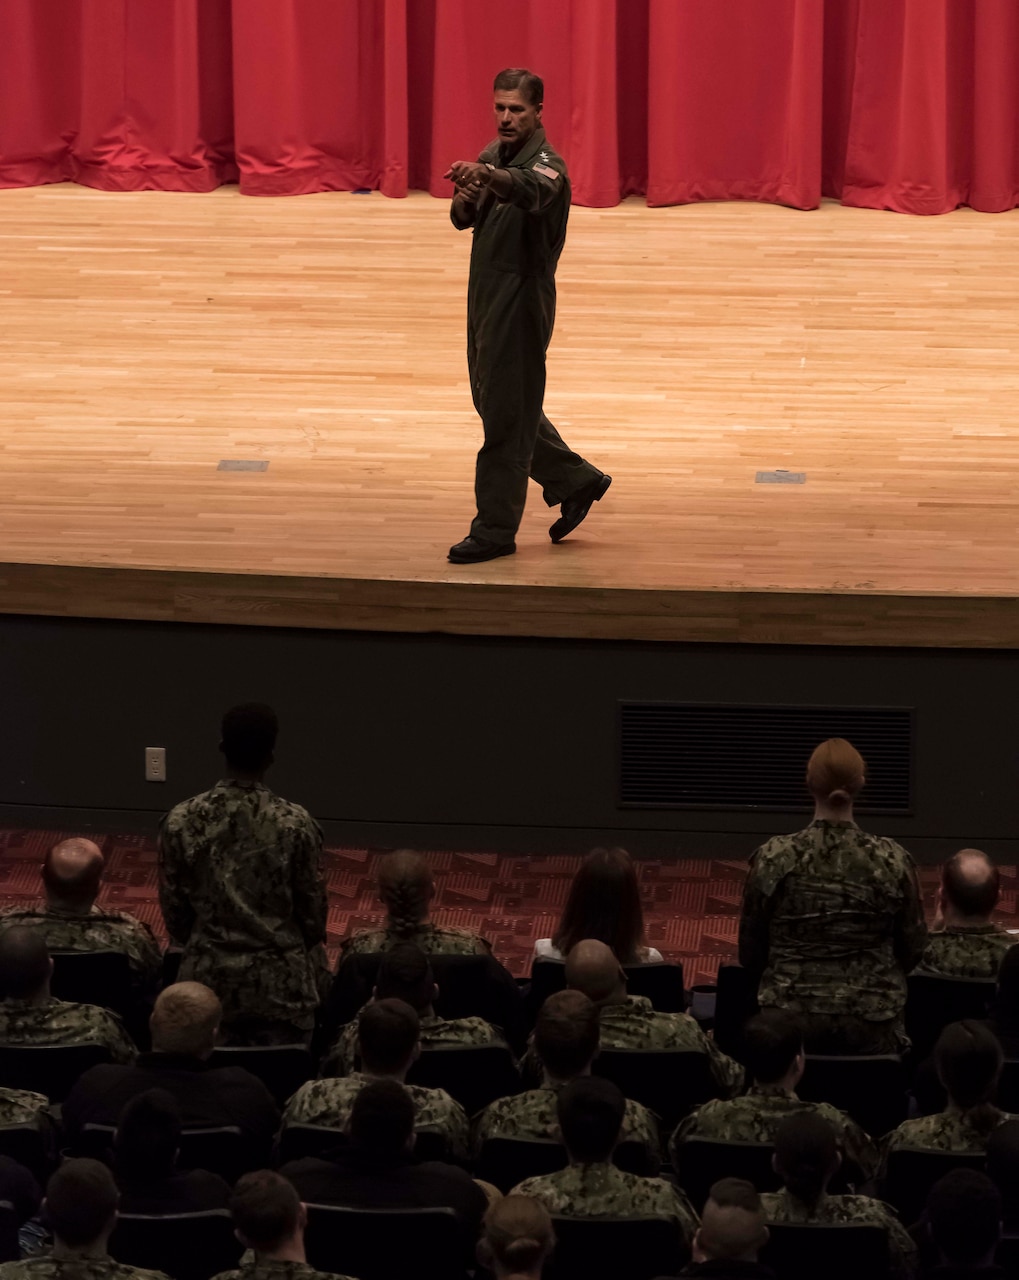 YOKOSUKA, Japan (January 23, 2019) Commander, United States Pacific Fleet, Adm. John C. Aquilino, speaks with Sailors during an all-hands call at Fleet Activities Yokosuka Fleet Theater. During the all-hands call Adm. Aquilino engaged with Sailors to hear their thoughts and answer questions about his priorities in the region.